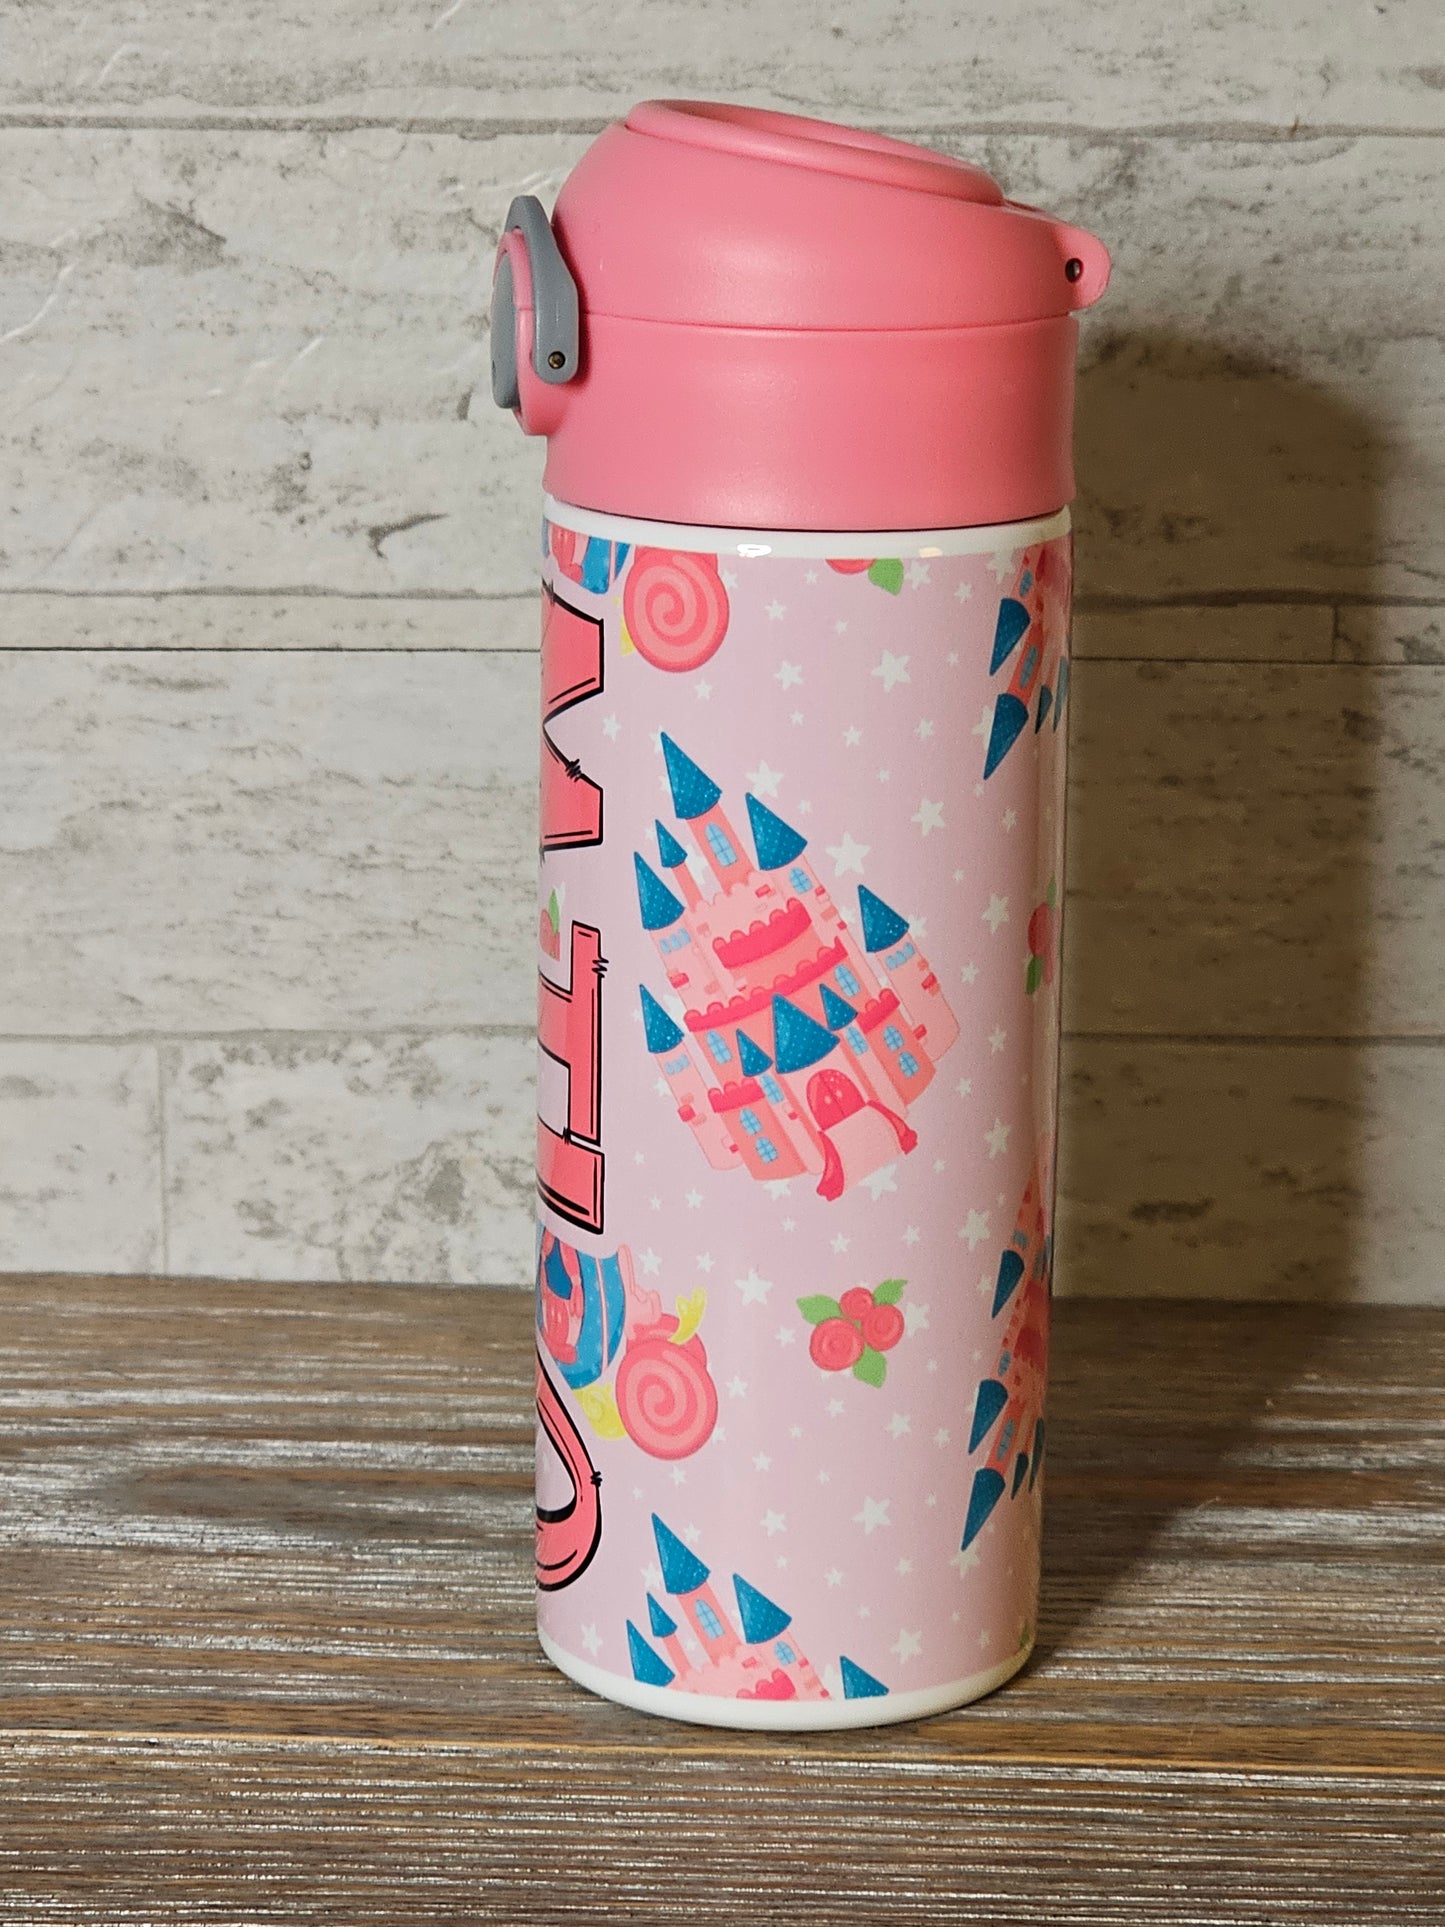 Pink Princess Themed Water Bottle - 12 oz Flip Top Water Bottle with Straw